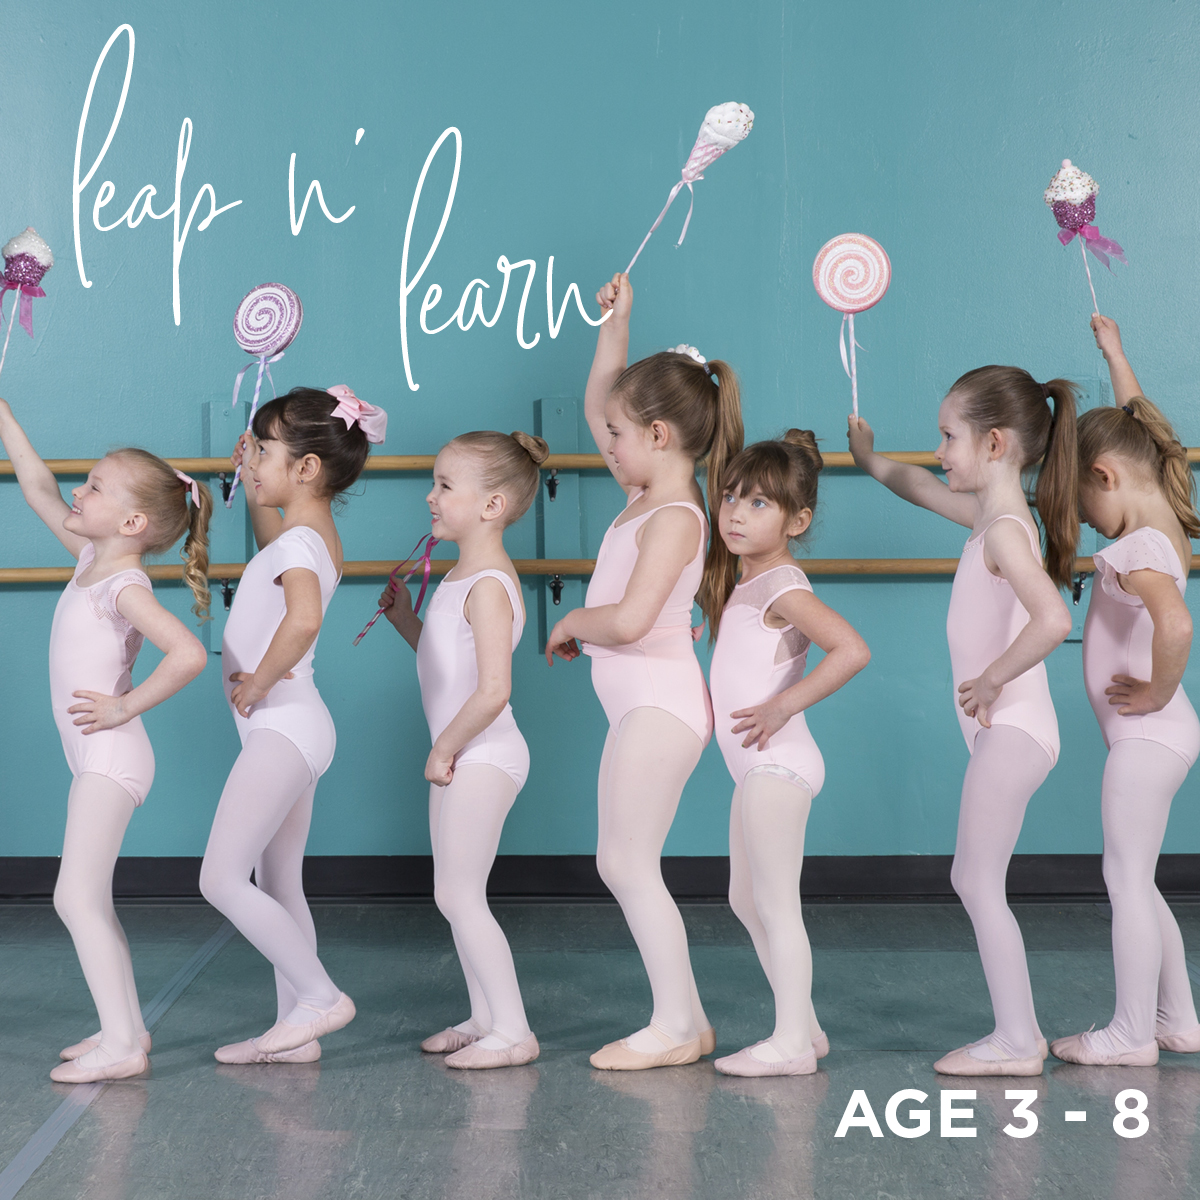 Leap 'N Learn Ballet - Ages 3-8